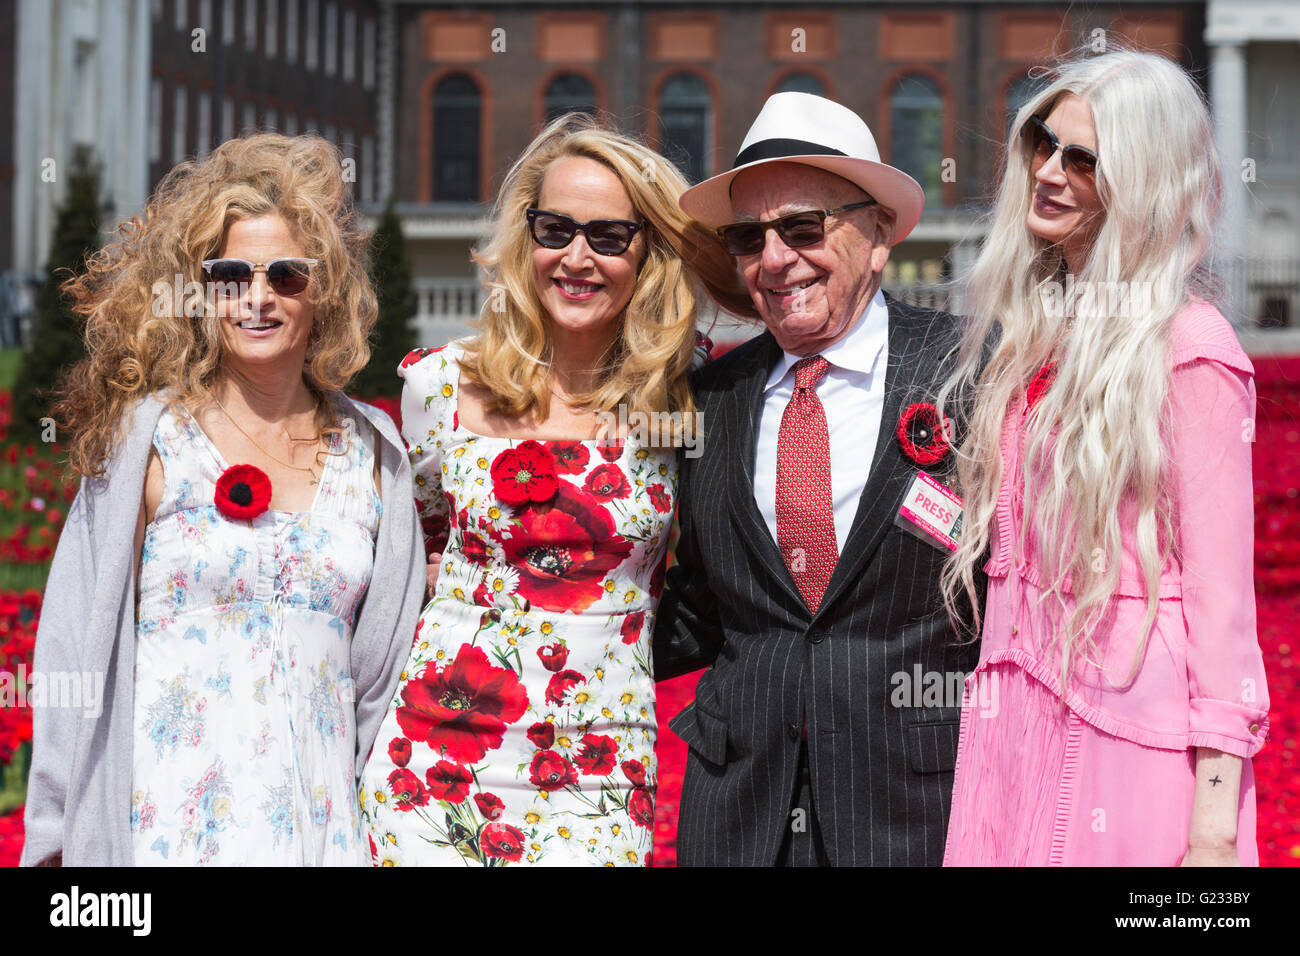 London, UK. 23 May 2016. Rupert Murdoch and Jerry Hall. Press day at the RHS Chelsea Flower Show. The 2016 show is open to the public from 24-28 May 2016. Credit:  Vibrant Pictures/Alamy Live News Stock Photo